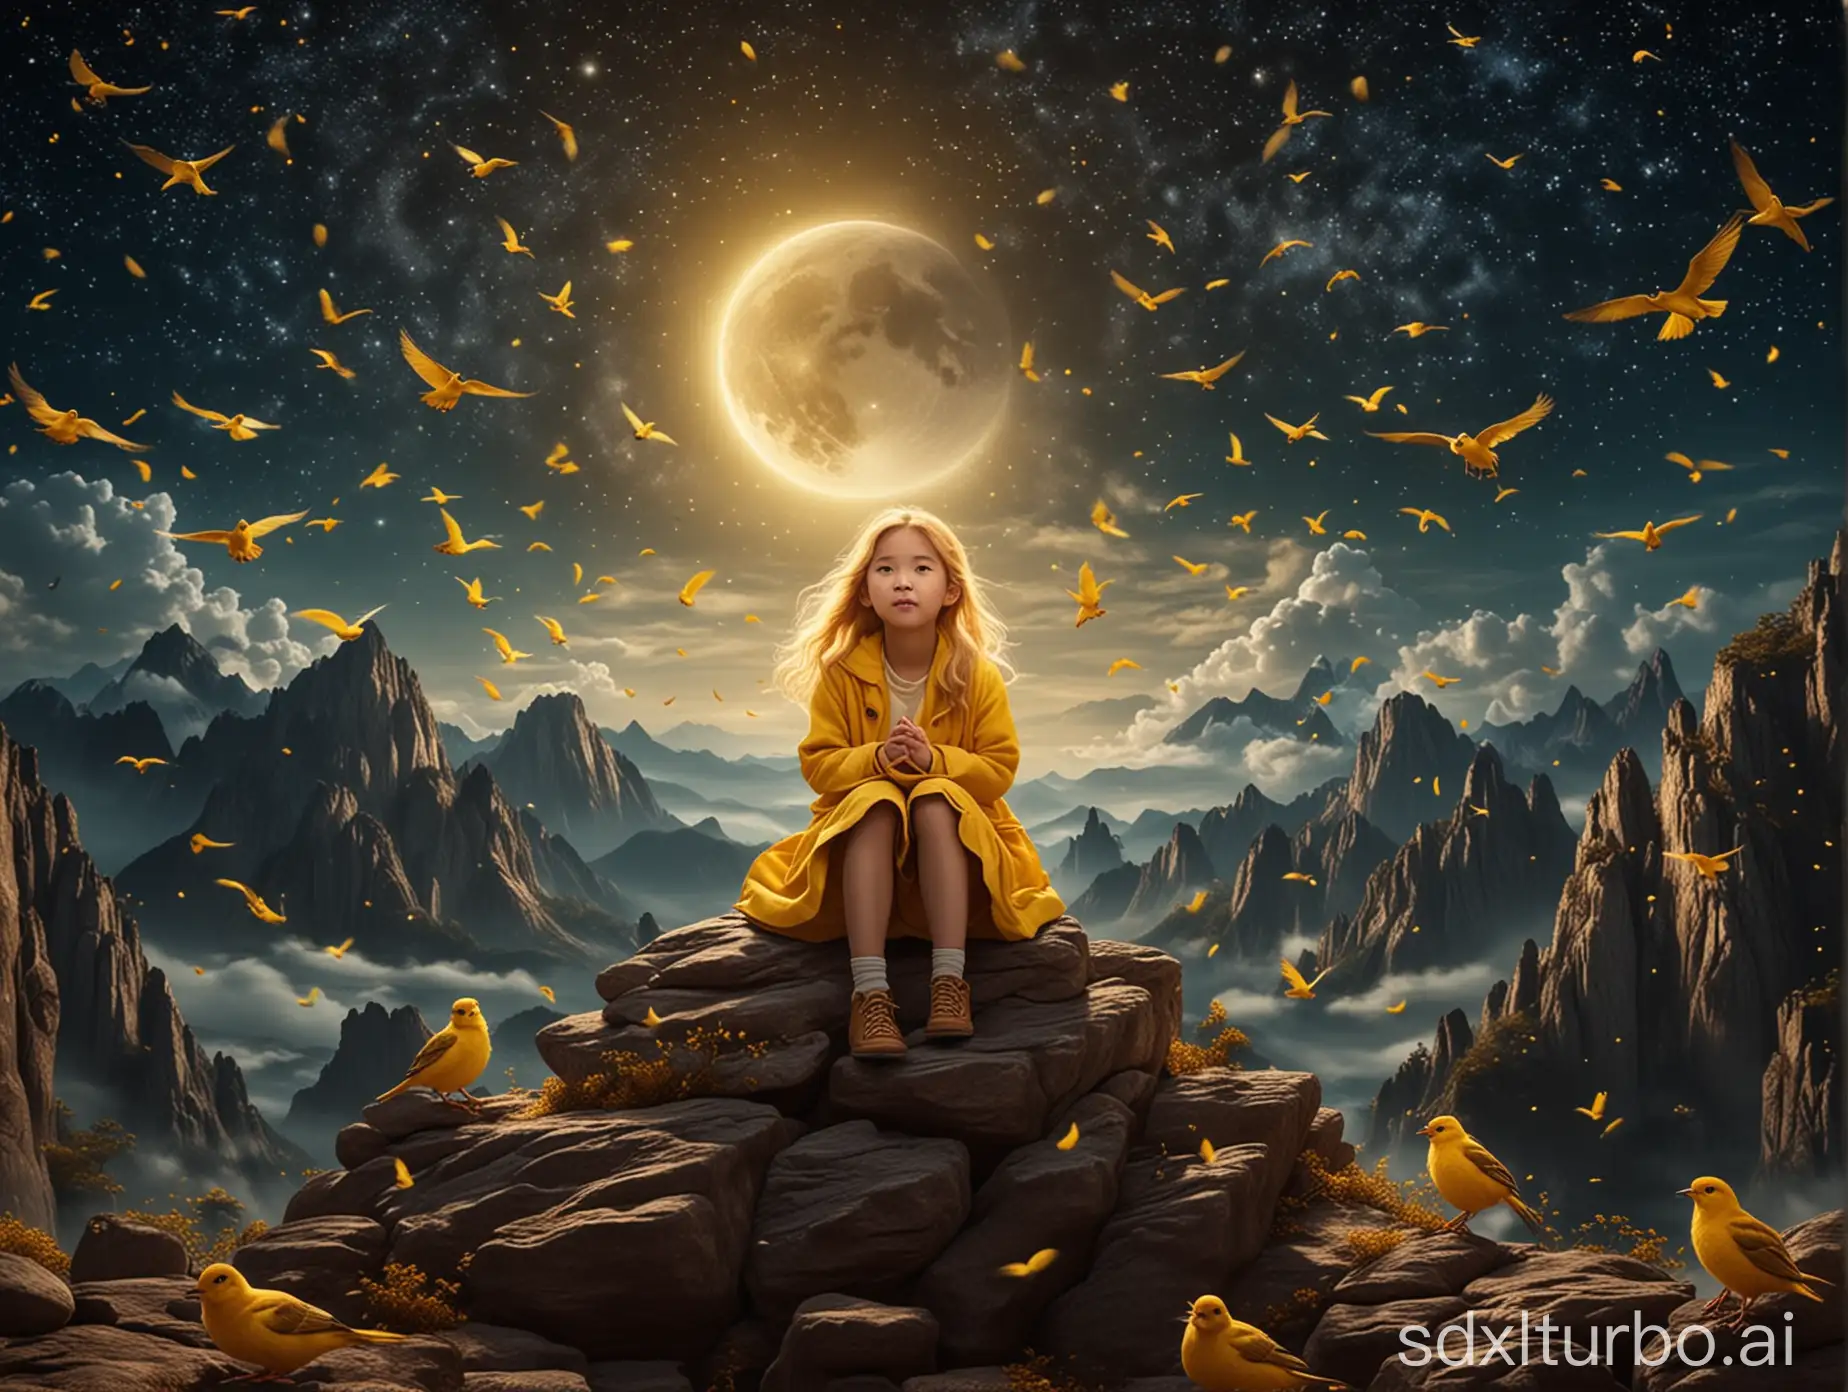 GoldenHaired-Asian-Girl-on-Moon-Mountain-Surrounded-by-Flying-Birds